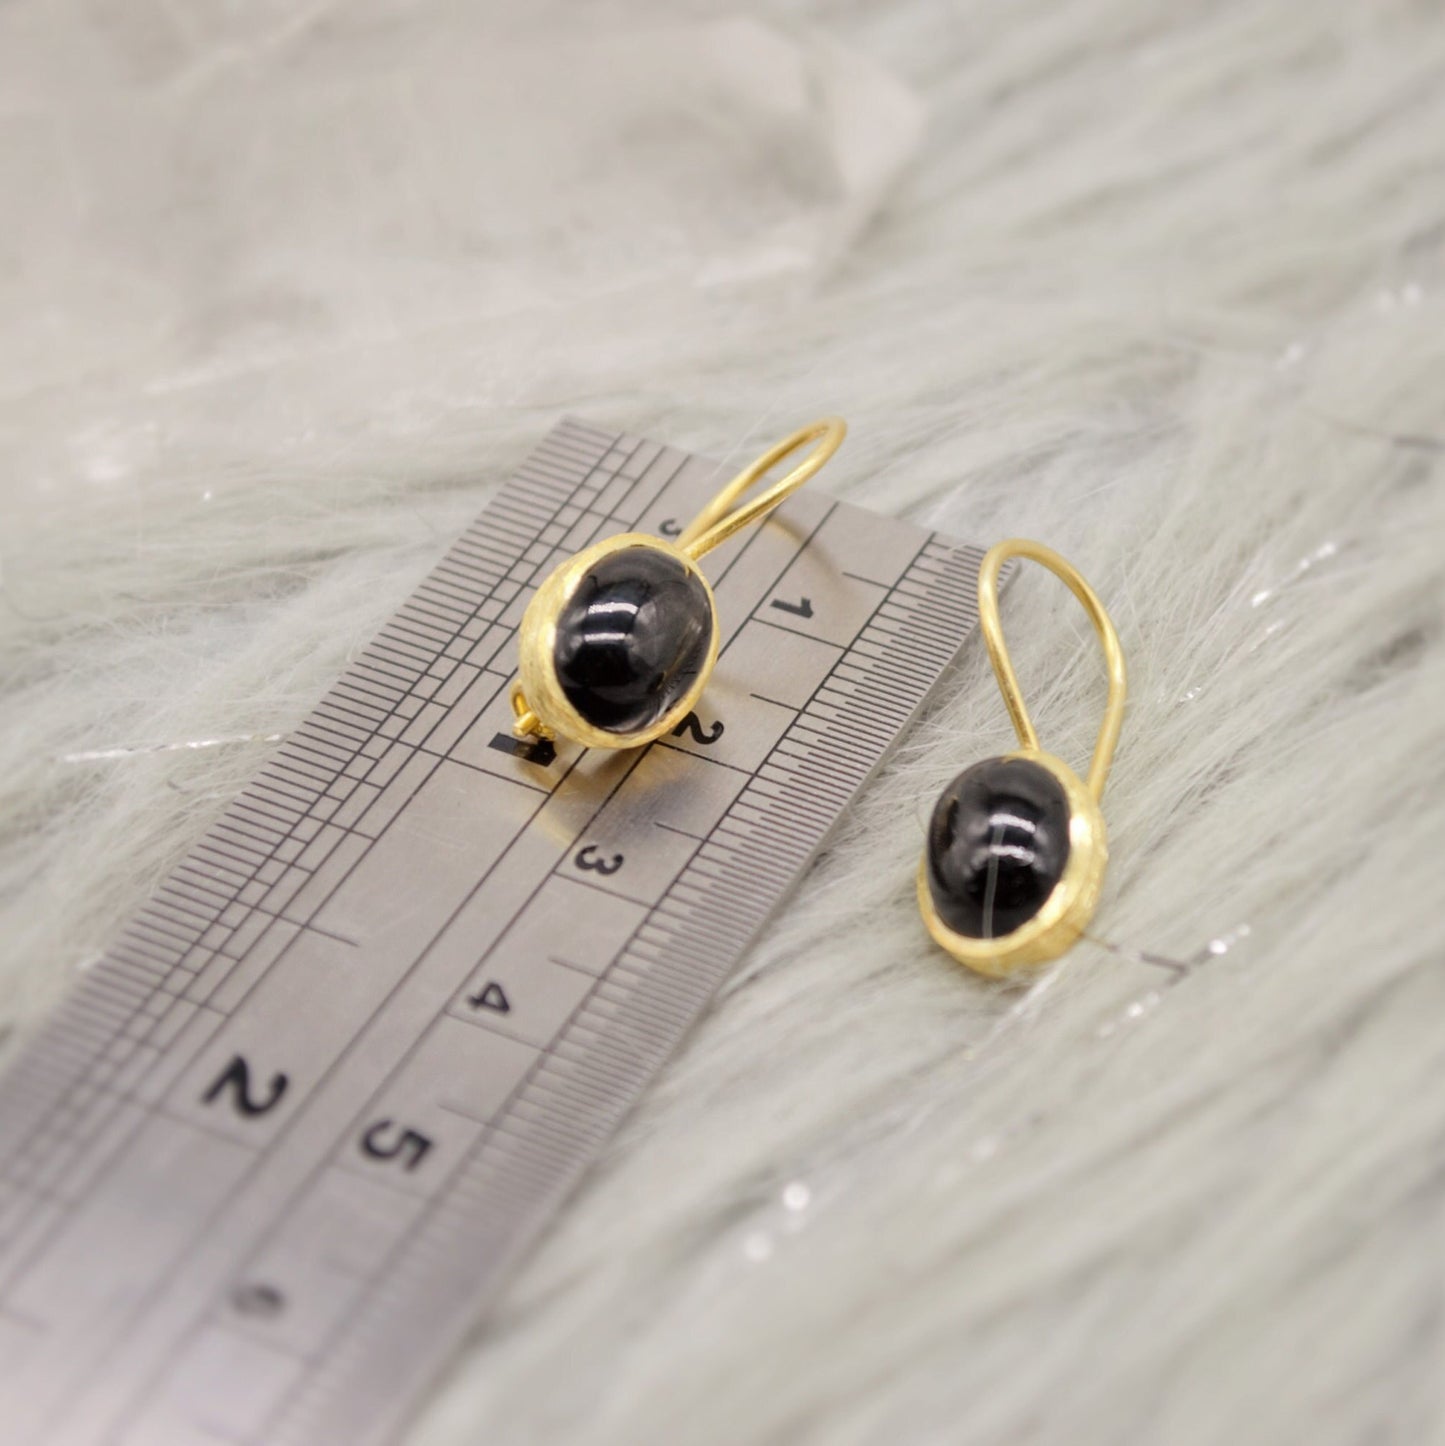 Black Onyx Gold Earrings, Gold Plated Sterling Silver Statement Gemstone Earrings, Unique Dangle, Black Onyx Jewelry, Birthday Gift For Her